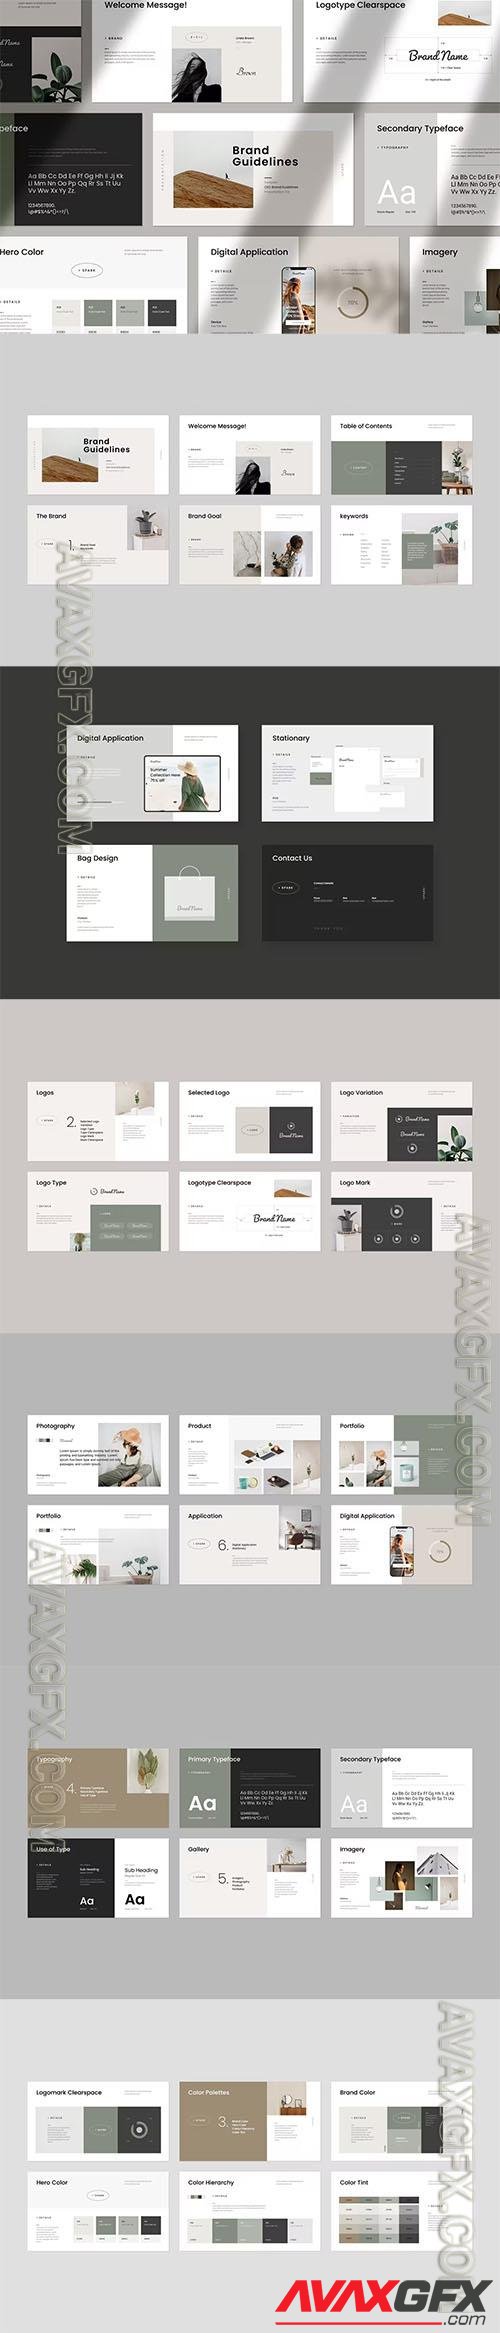 Brand Guideline PowerPoint Template H7AS5MX